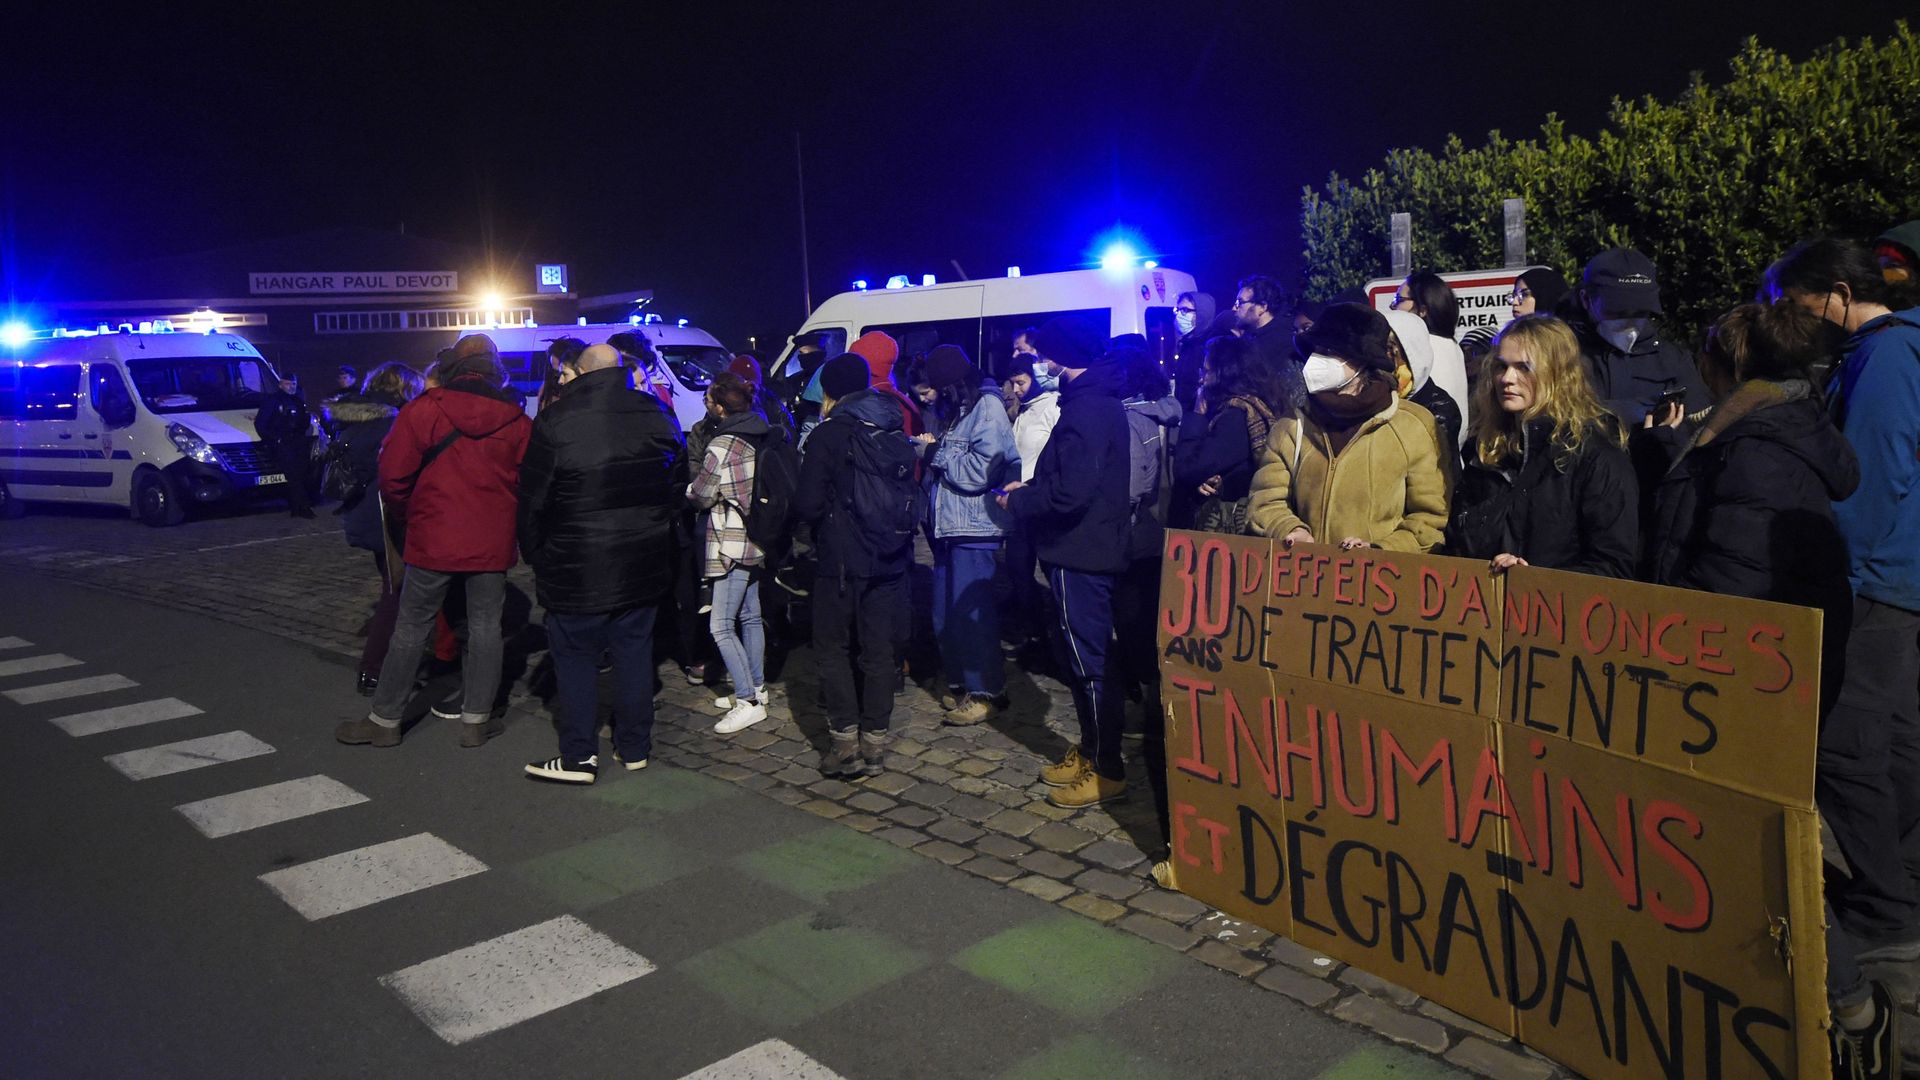 Migrant rights protesters with a sign reading "30 years of announcements, of inhuman and degrading treatment" on November 24 in Calais, France.